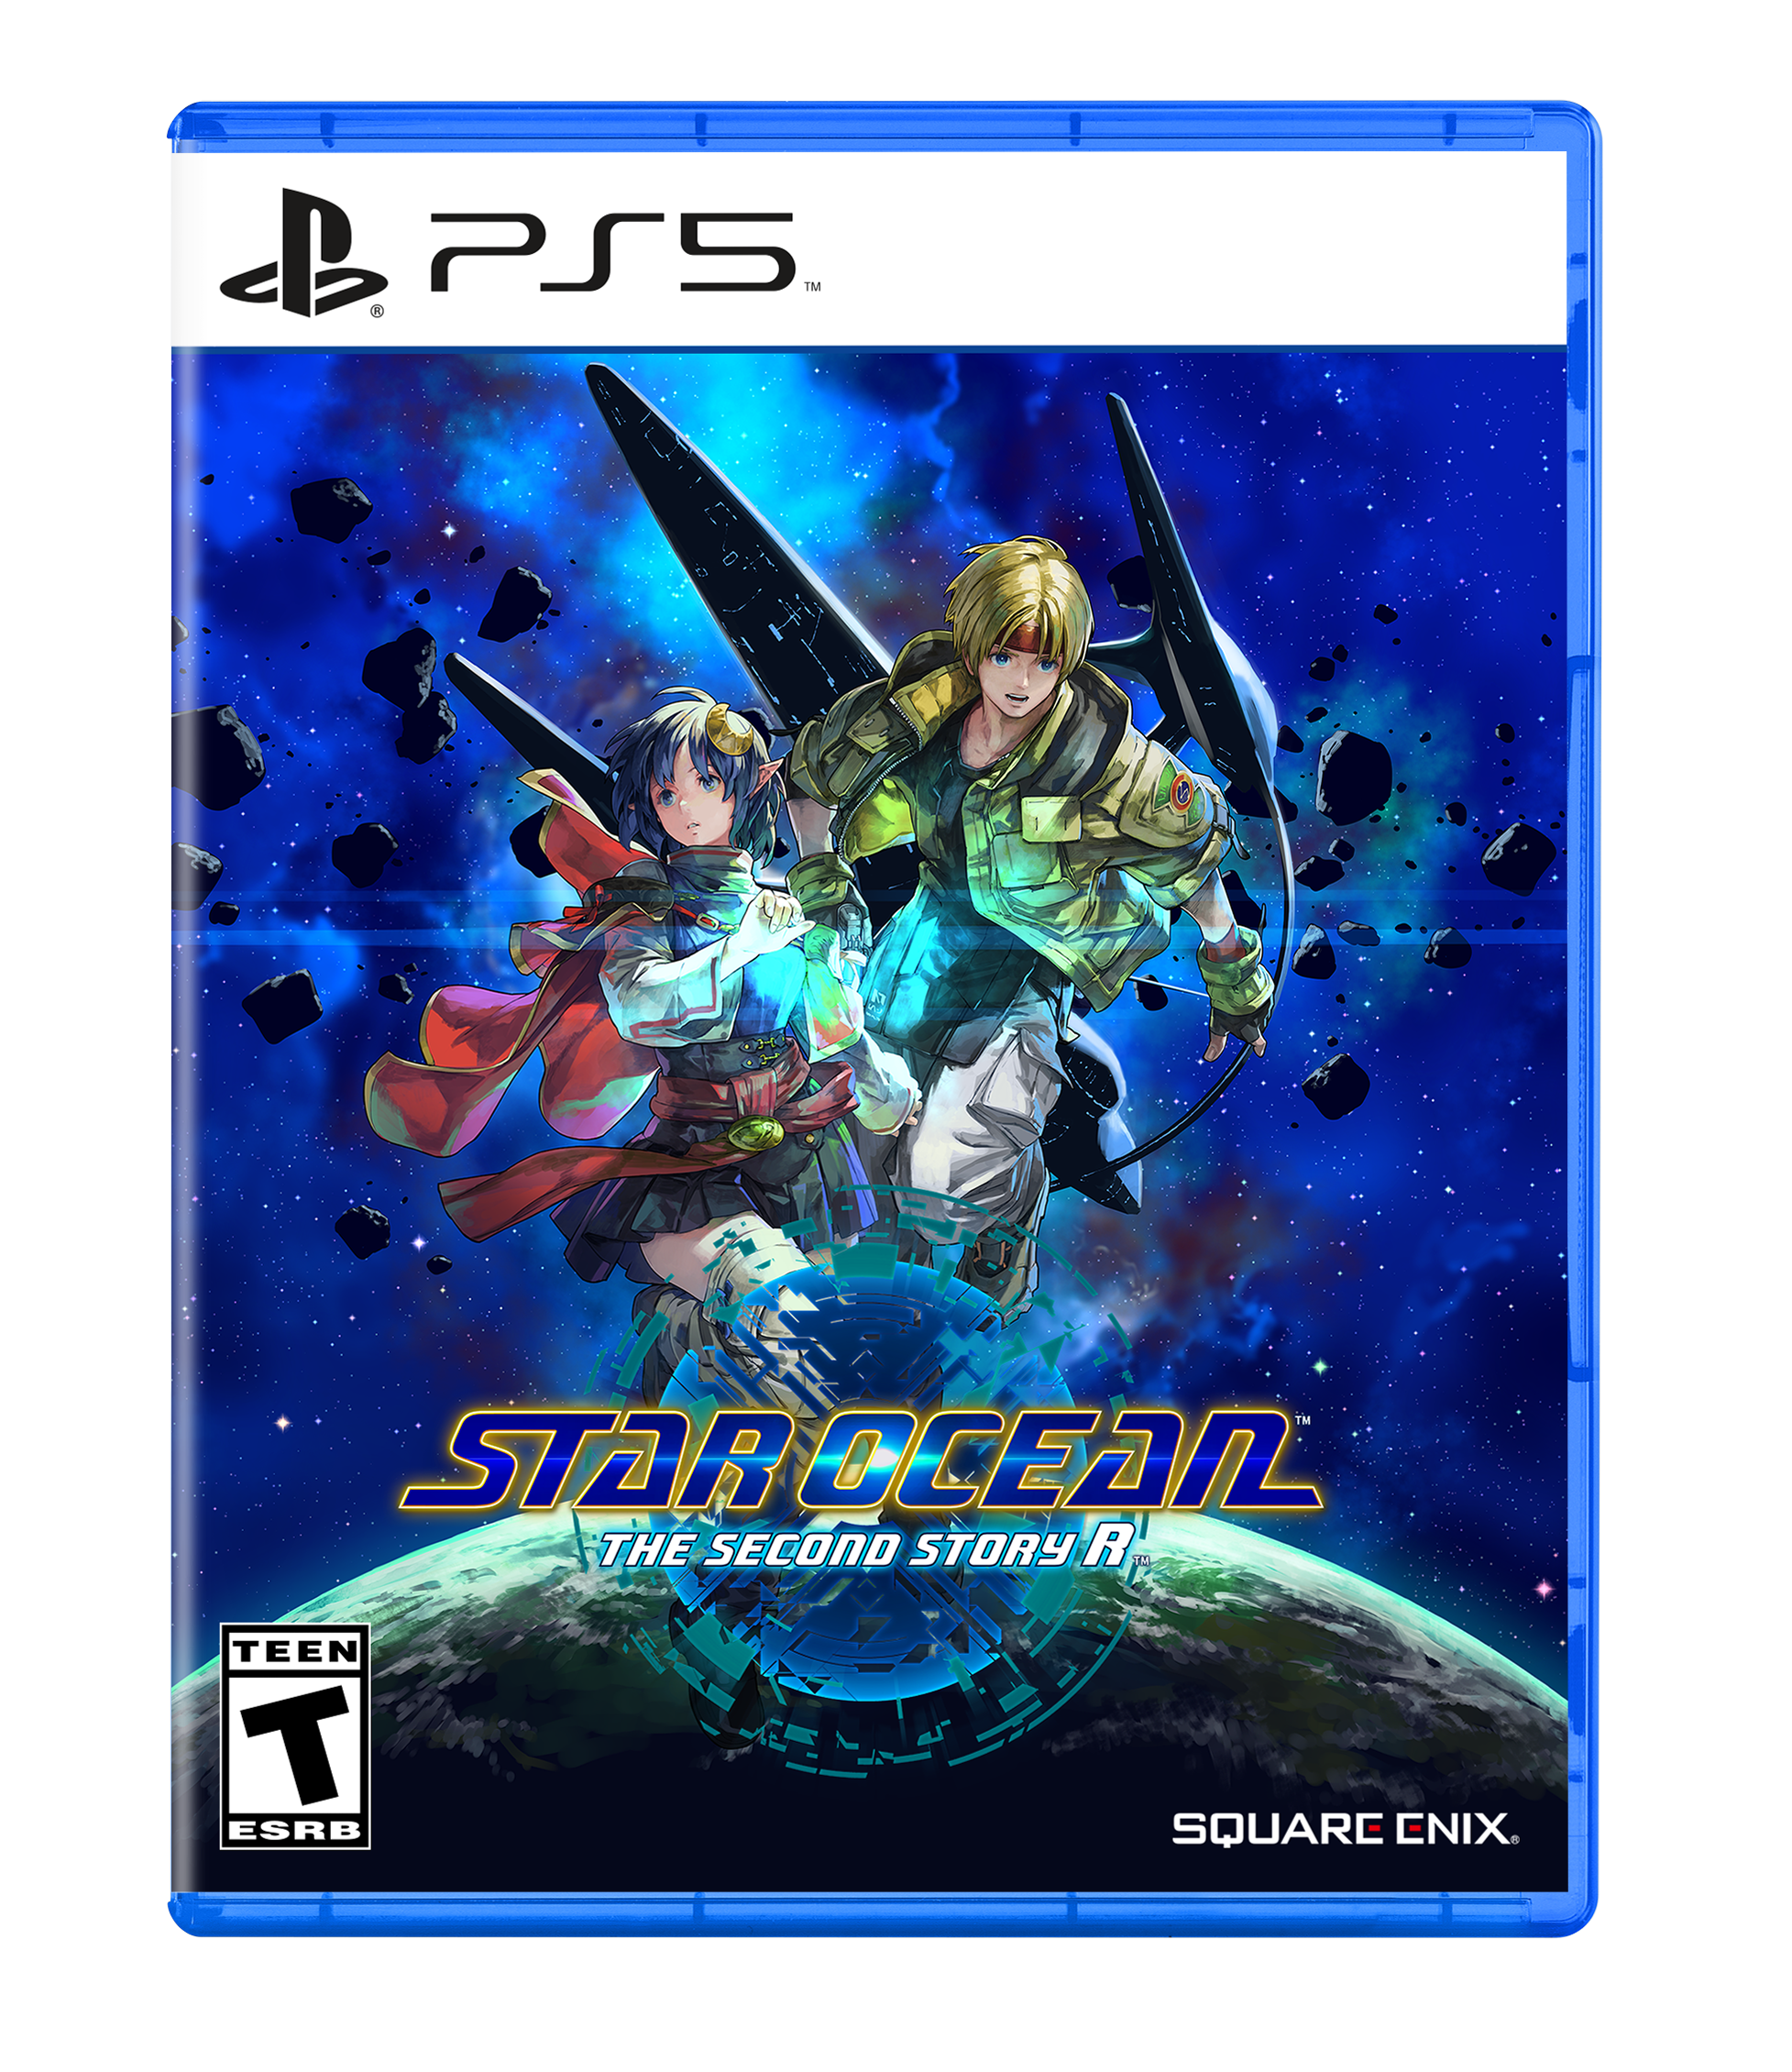 How long is Star Ocean: The Second Story R?